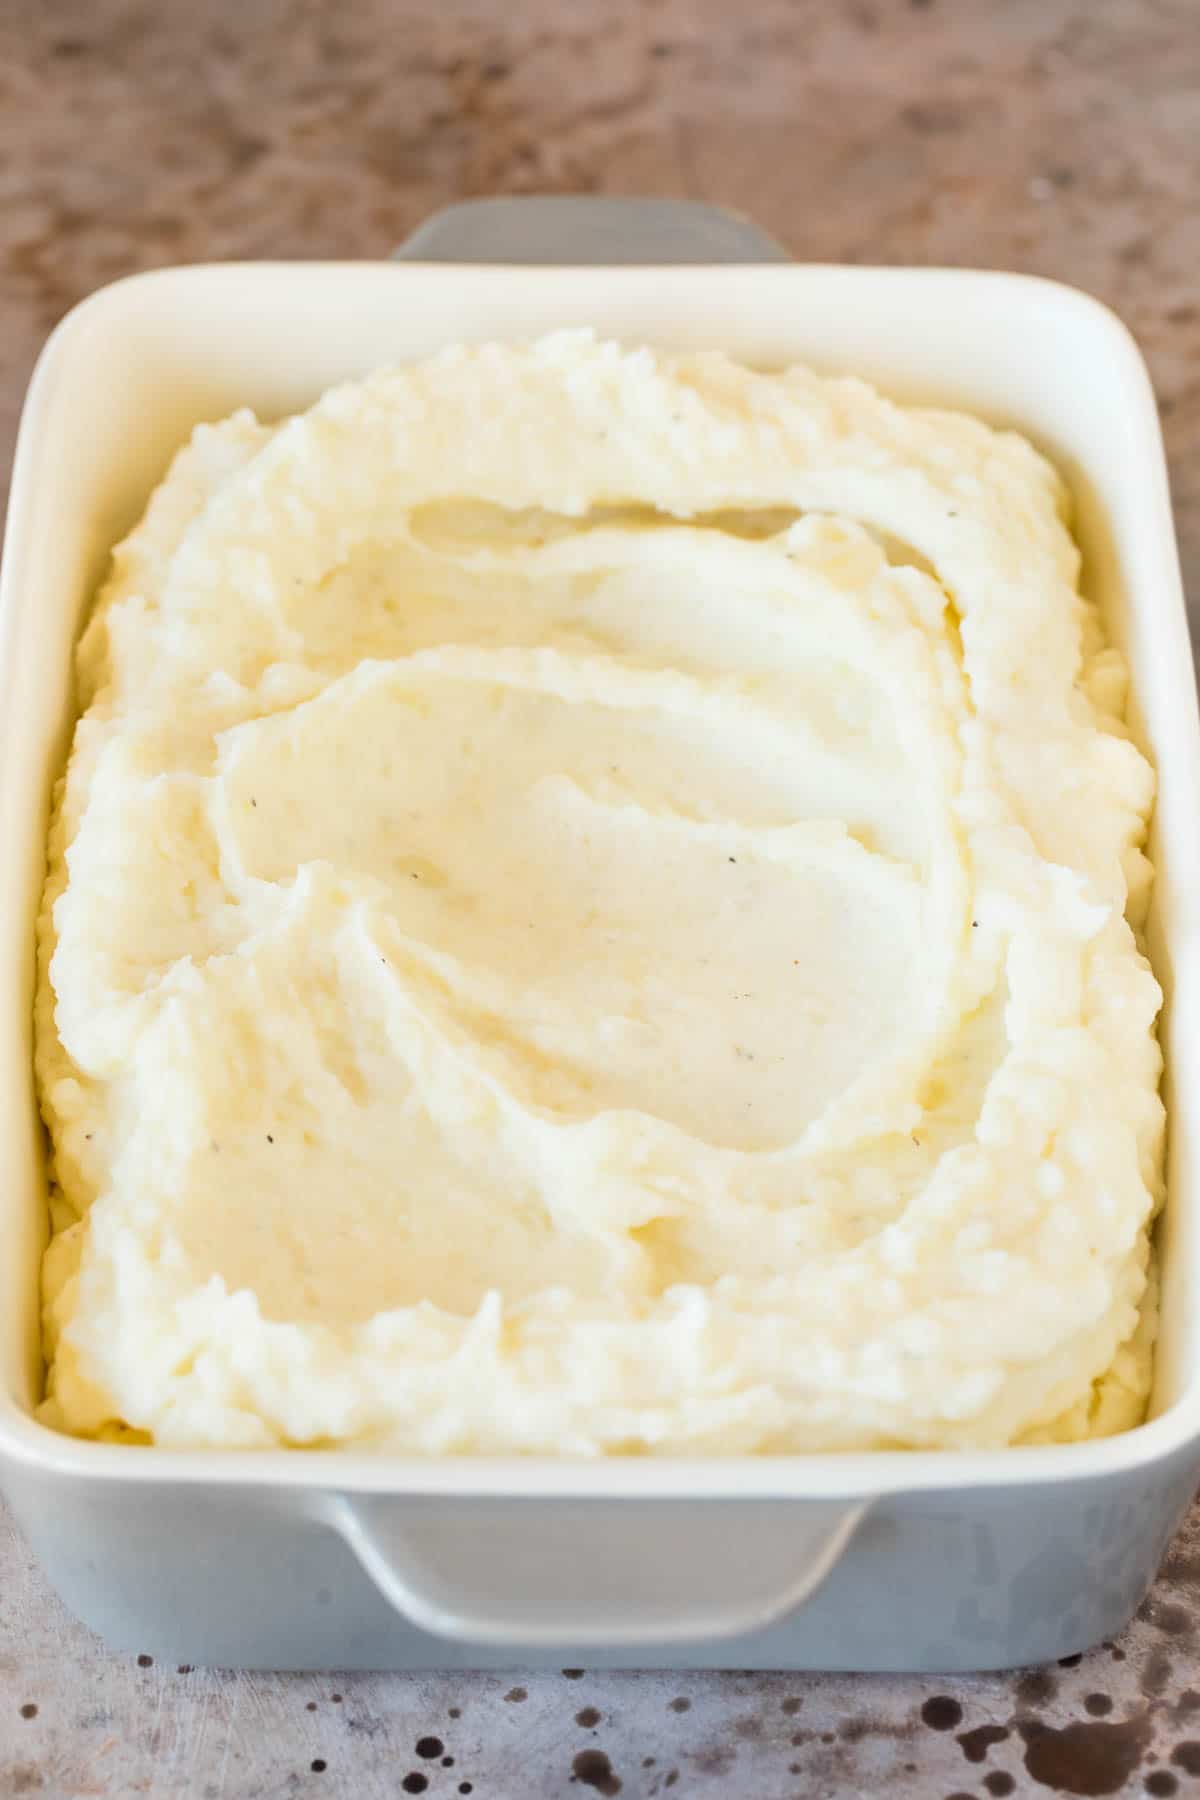 Mashed up potatoes in a baking dish.